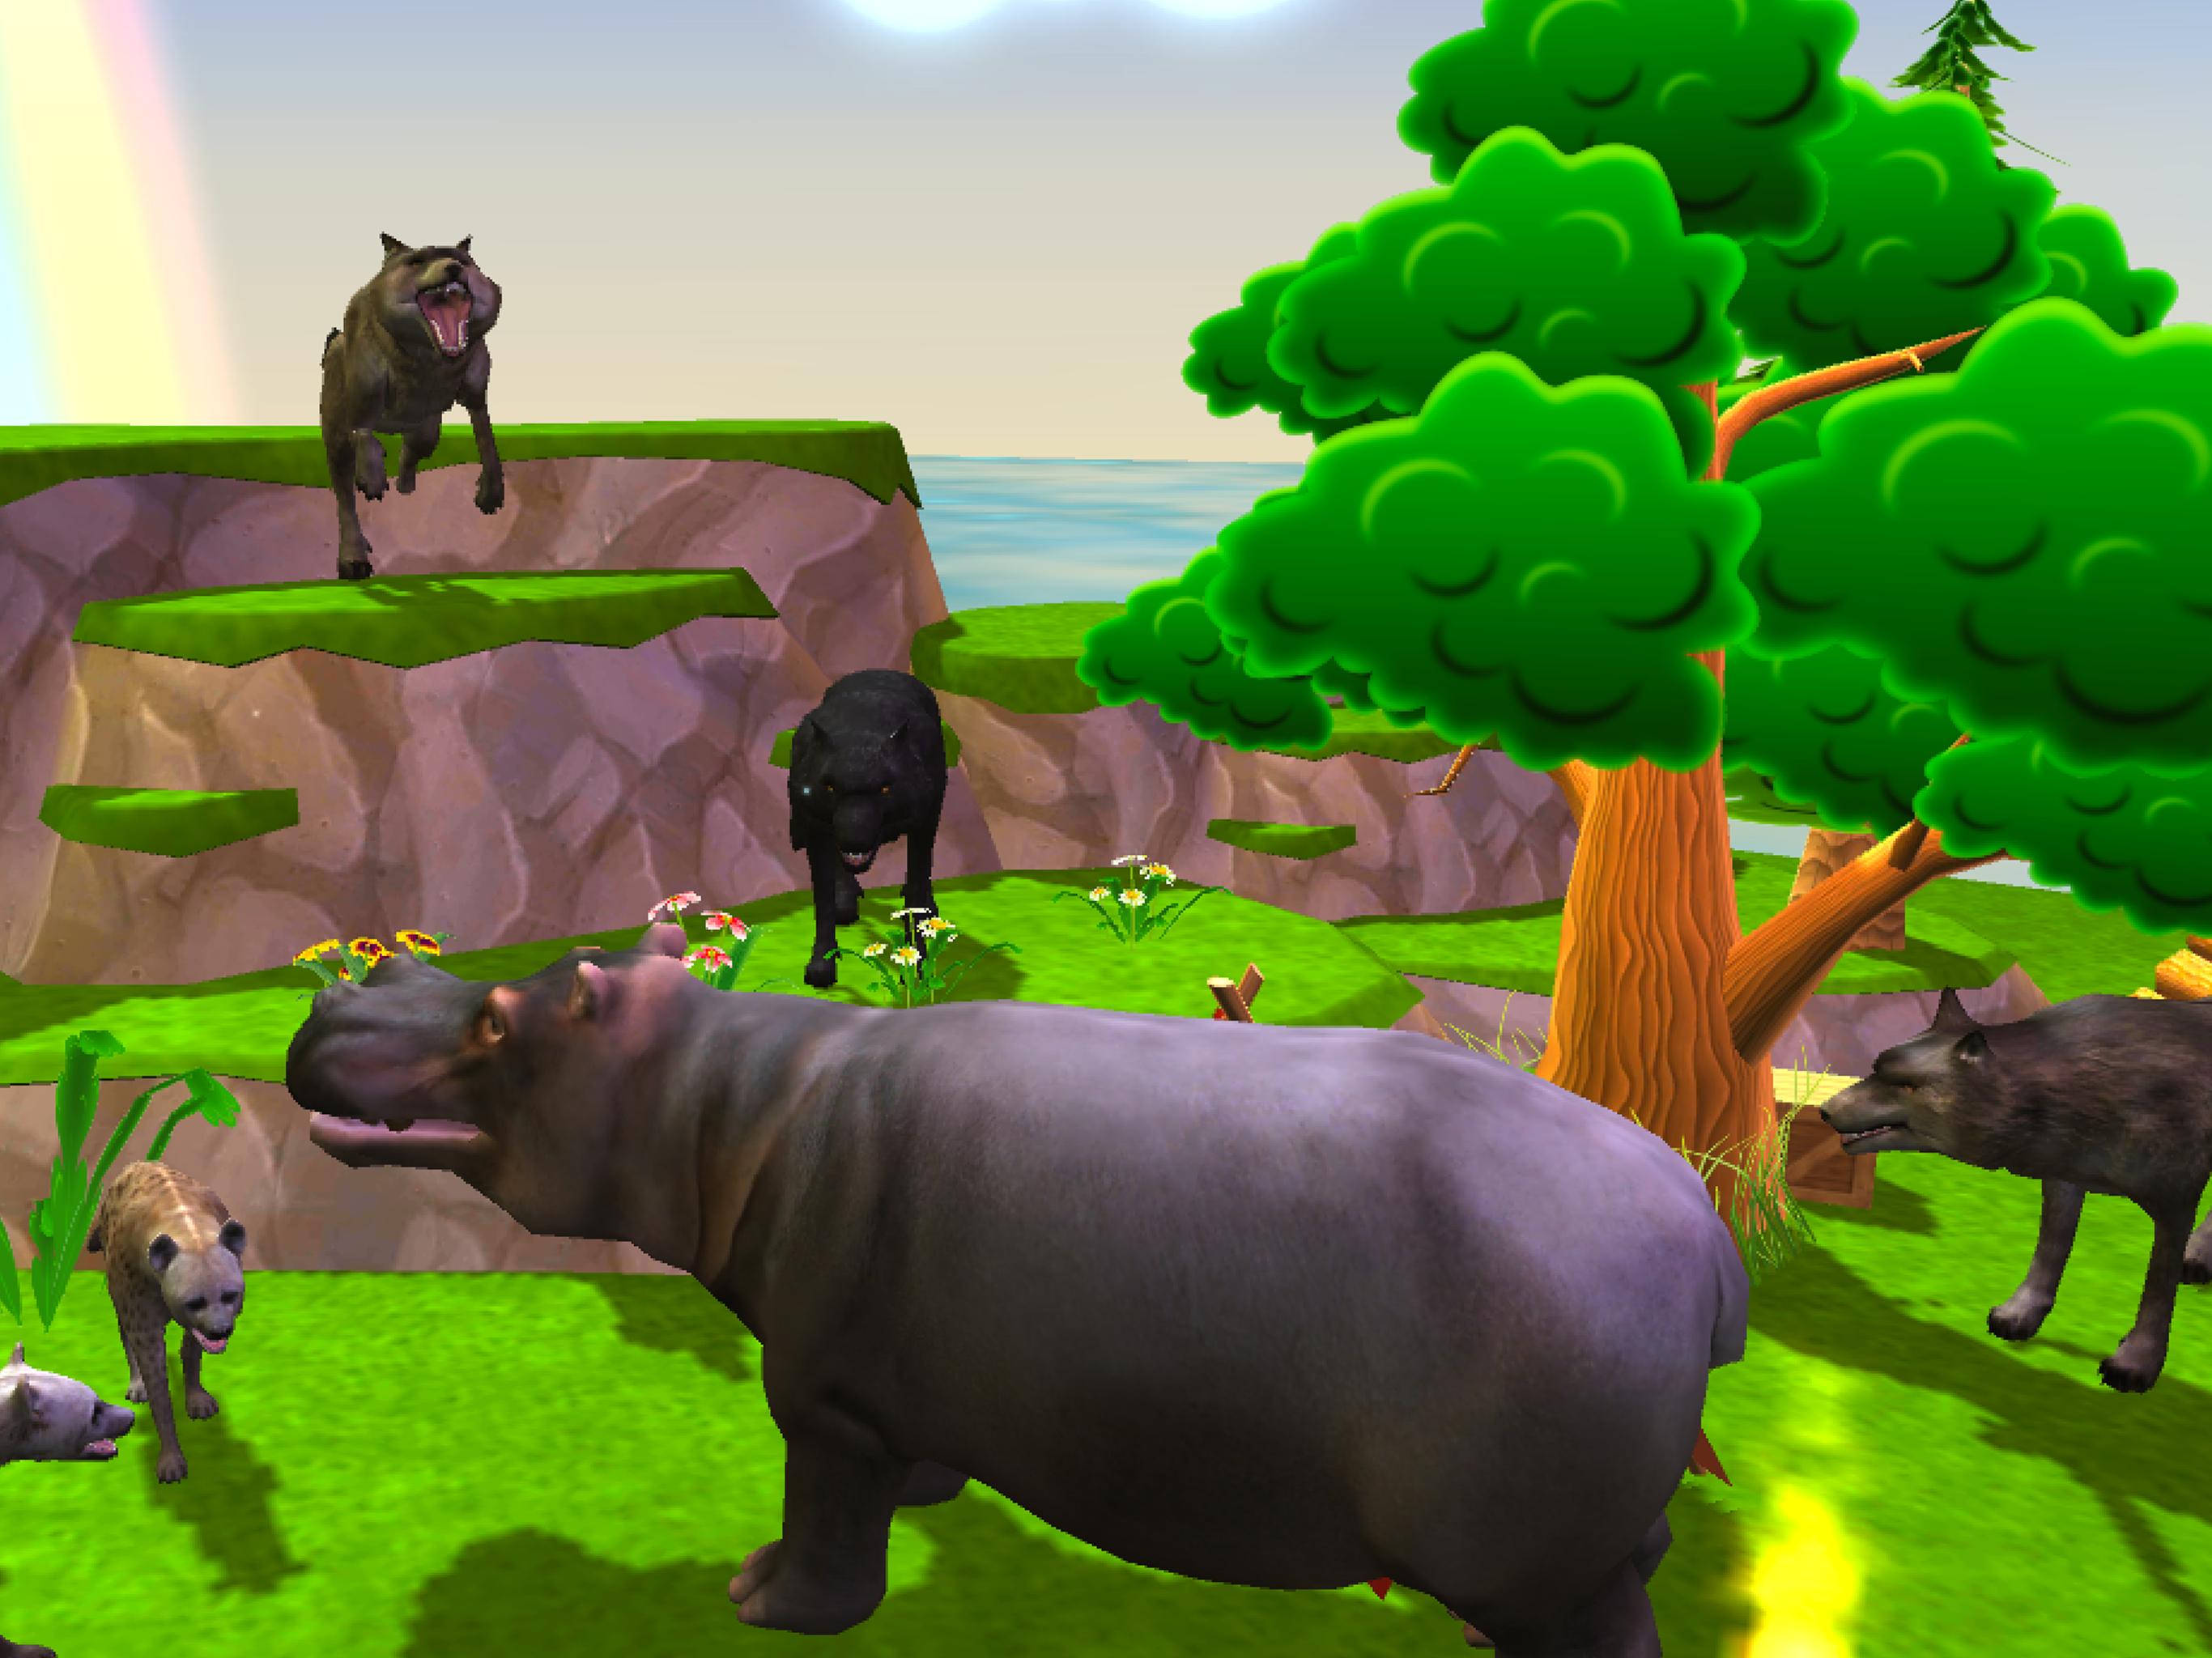 Animal Zoo Games simulator for Android APK Download